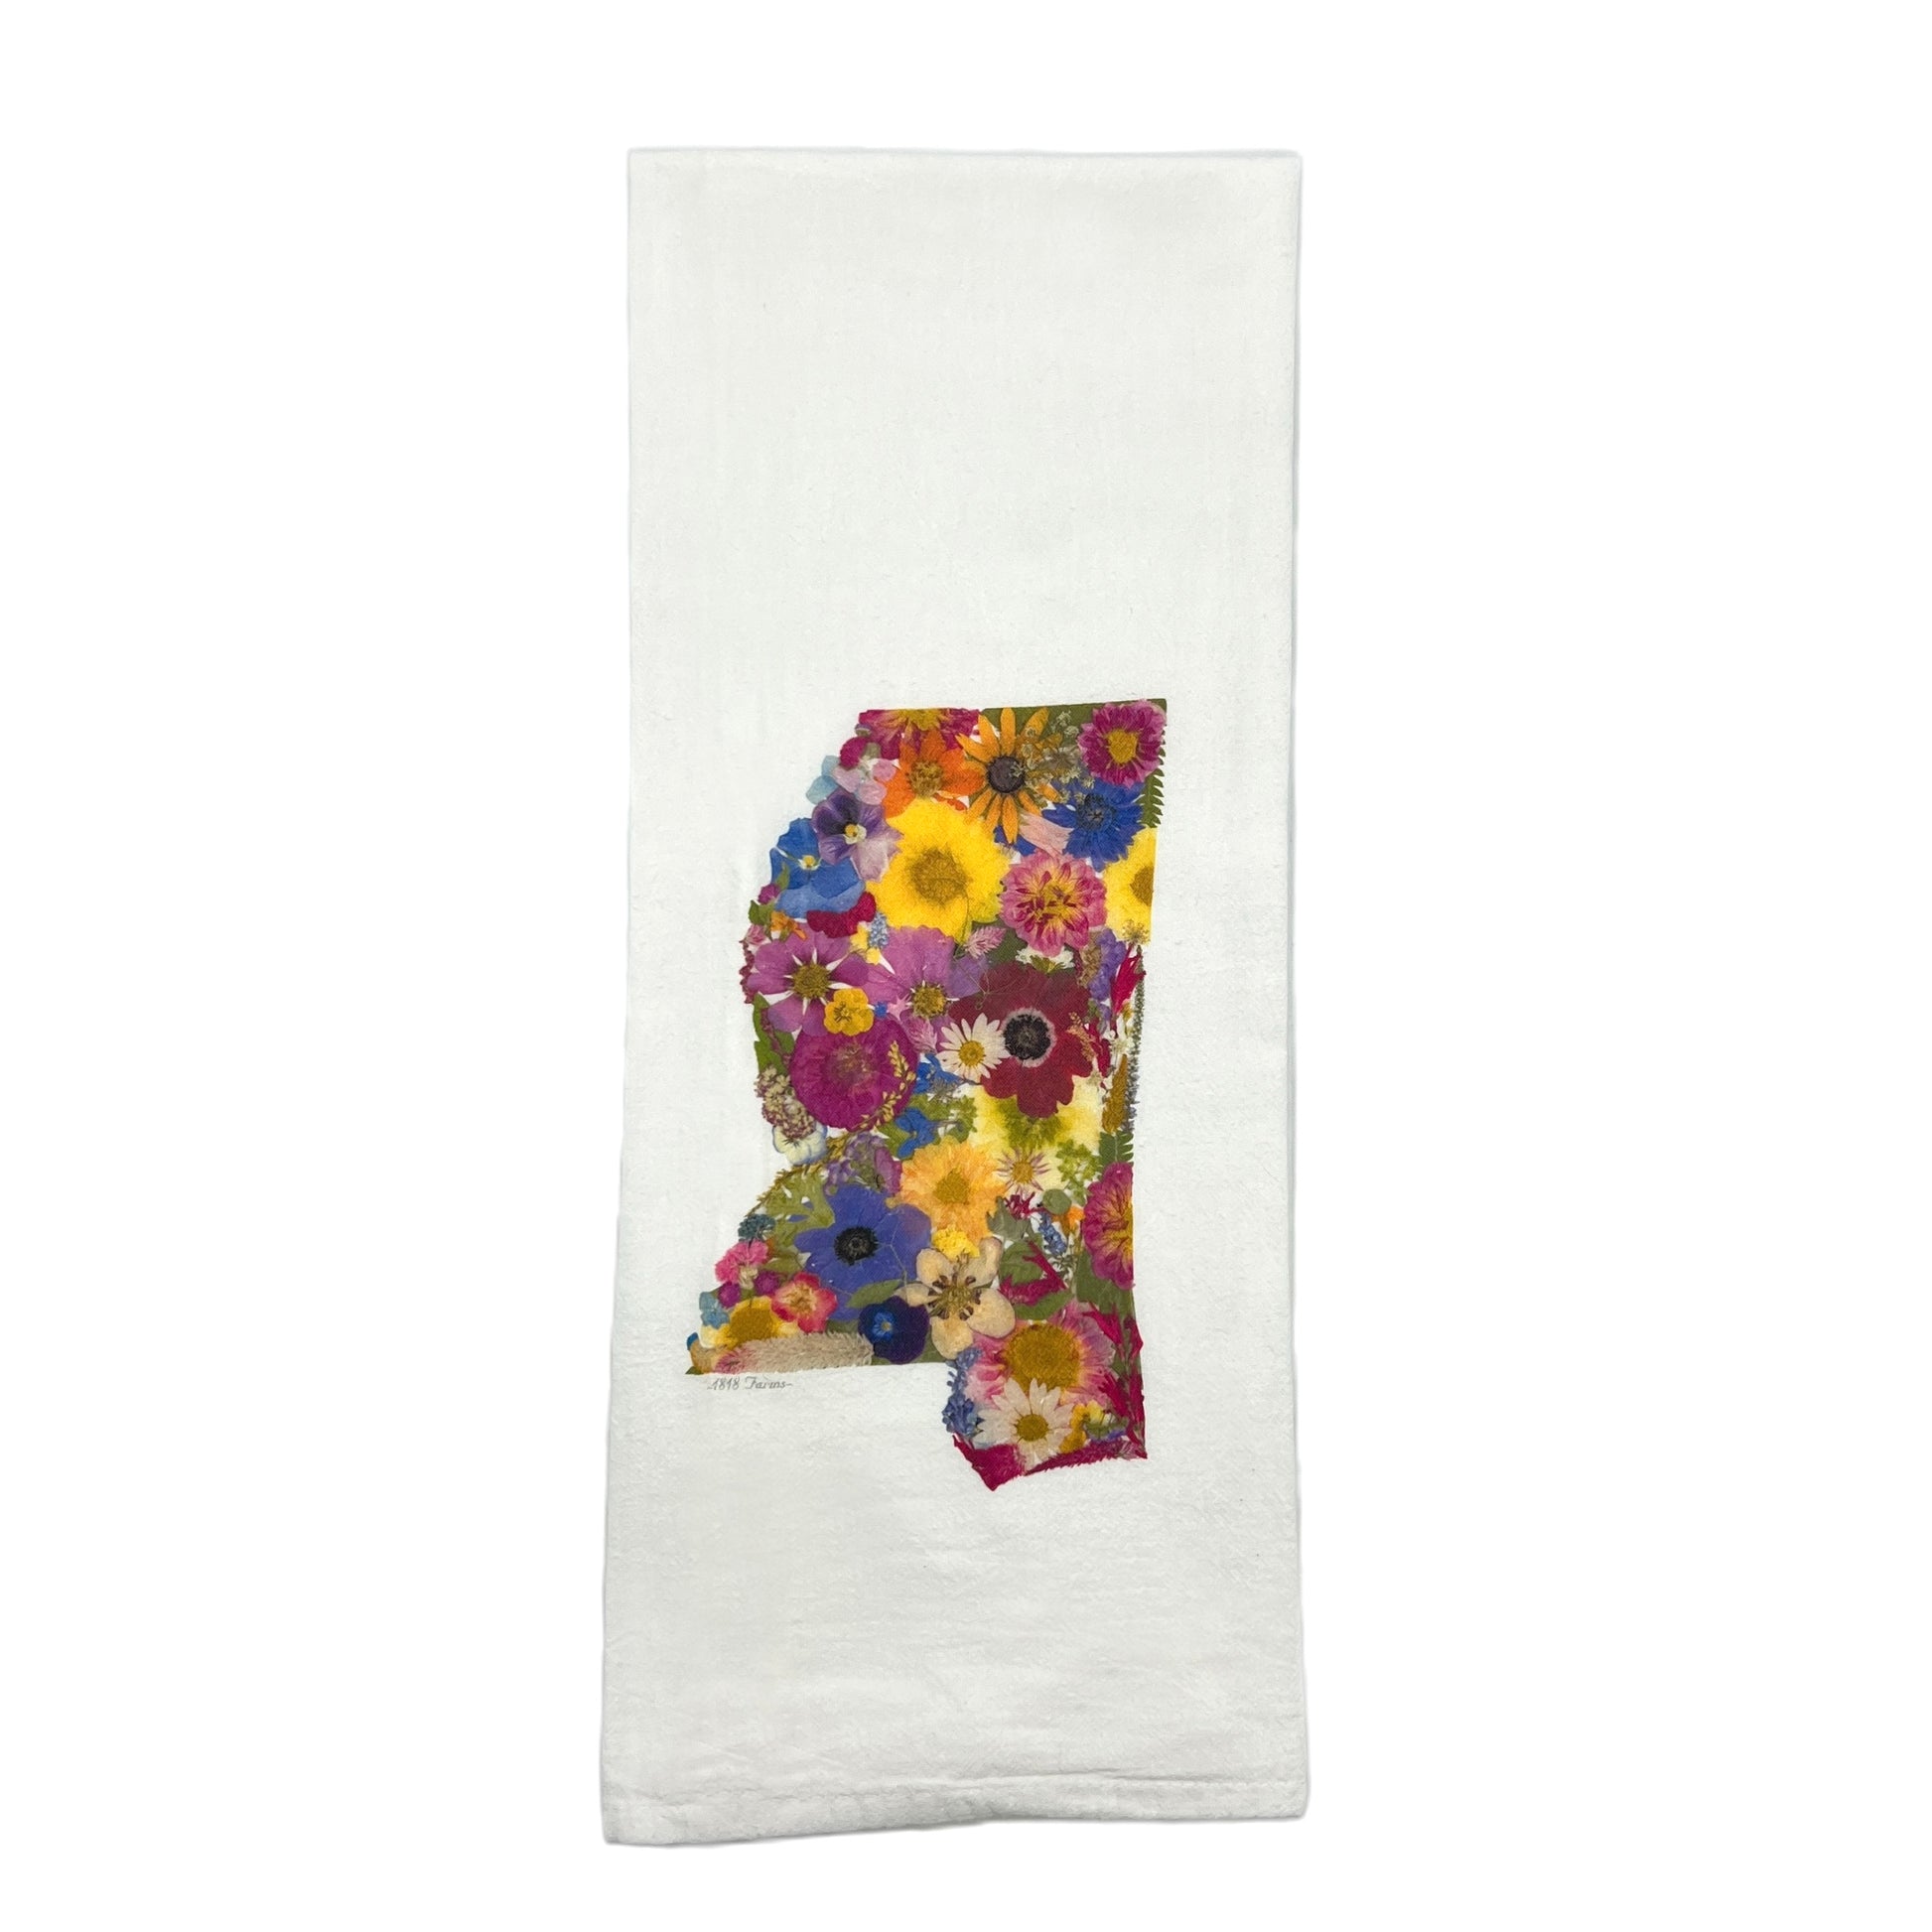 State Themed Flour Sack Towel  - "Where I Bloom" Collection Towel 1818 Farms Mississippi  